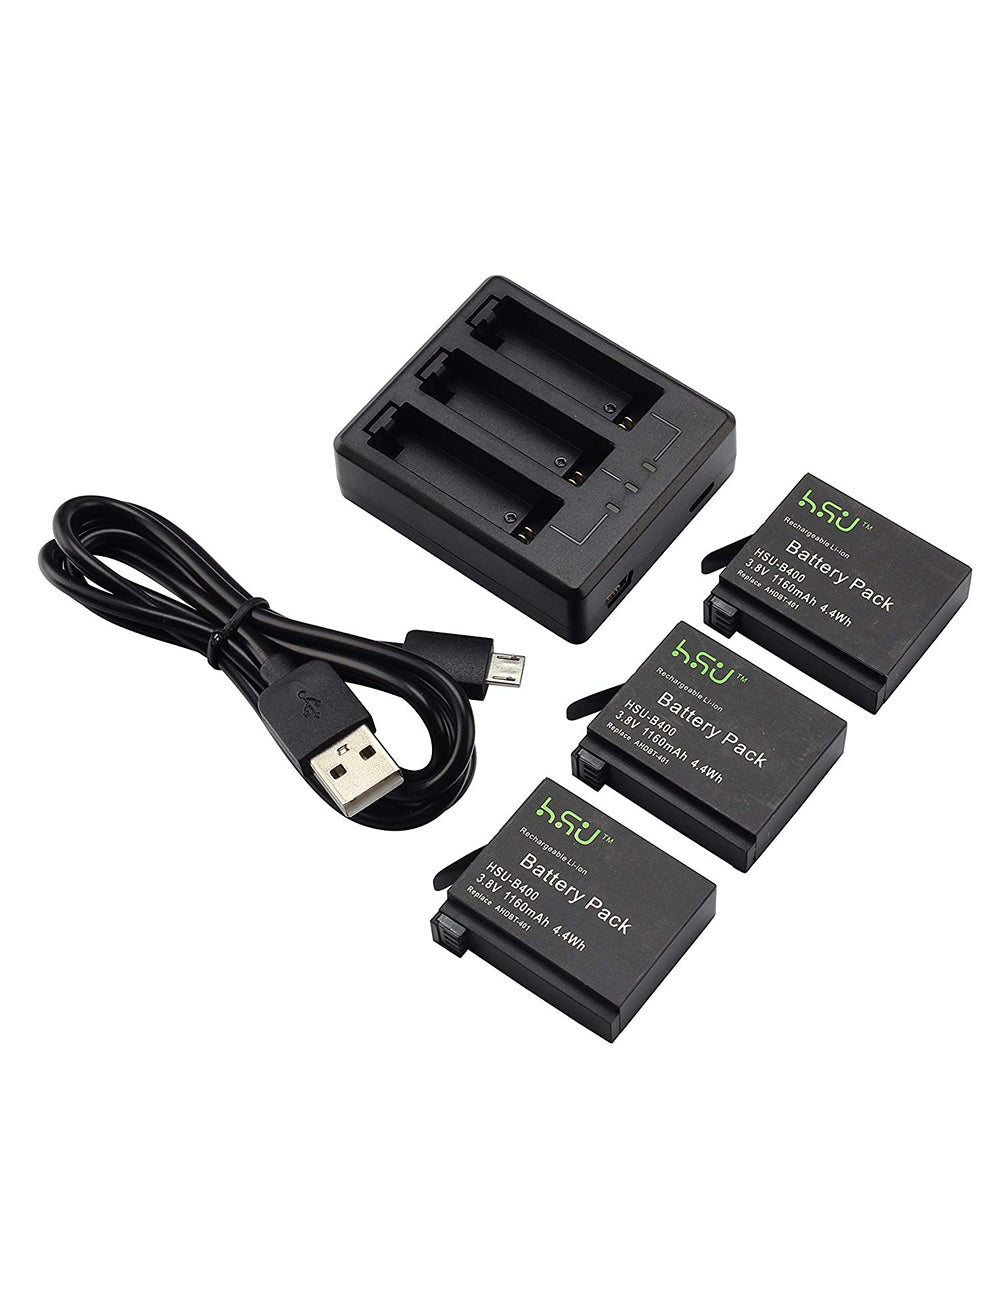 Hsu Rechargeable Battery And Triple Charger For Gopro Hero 4 Silver Hsupro